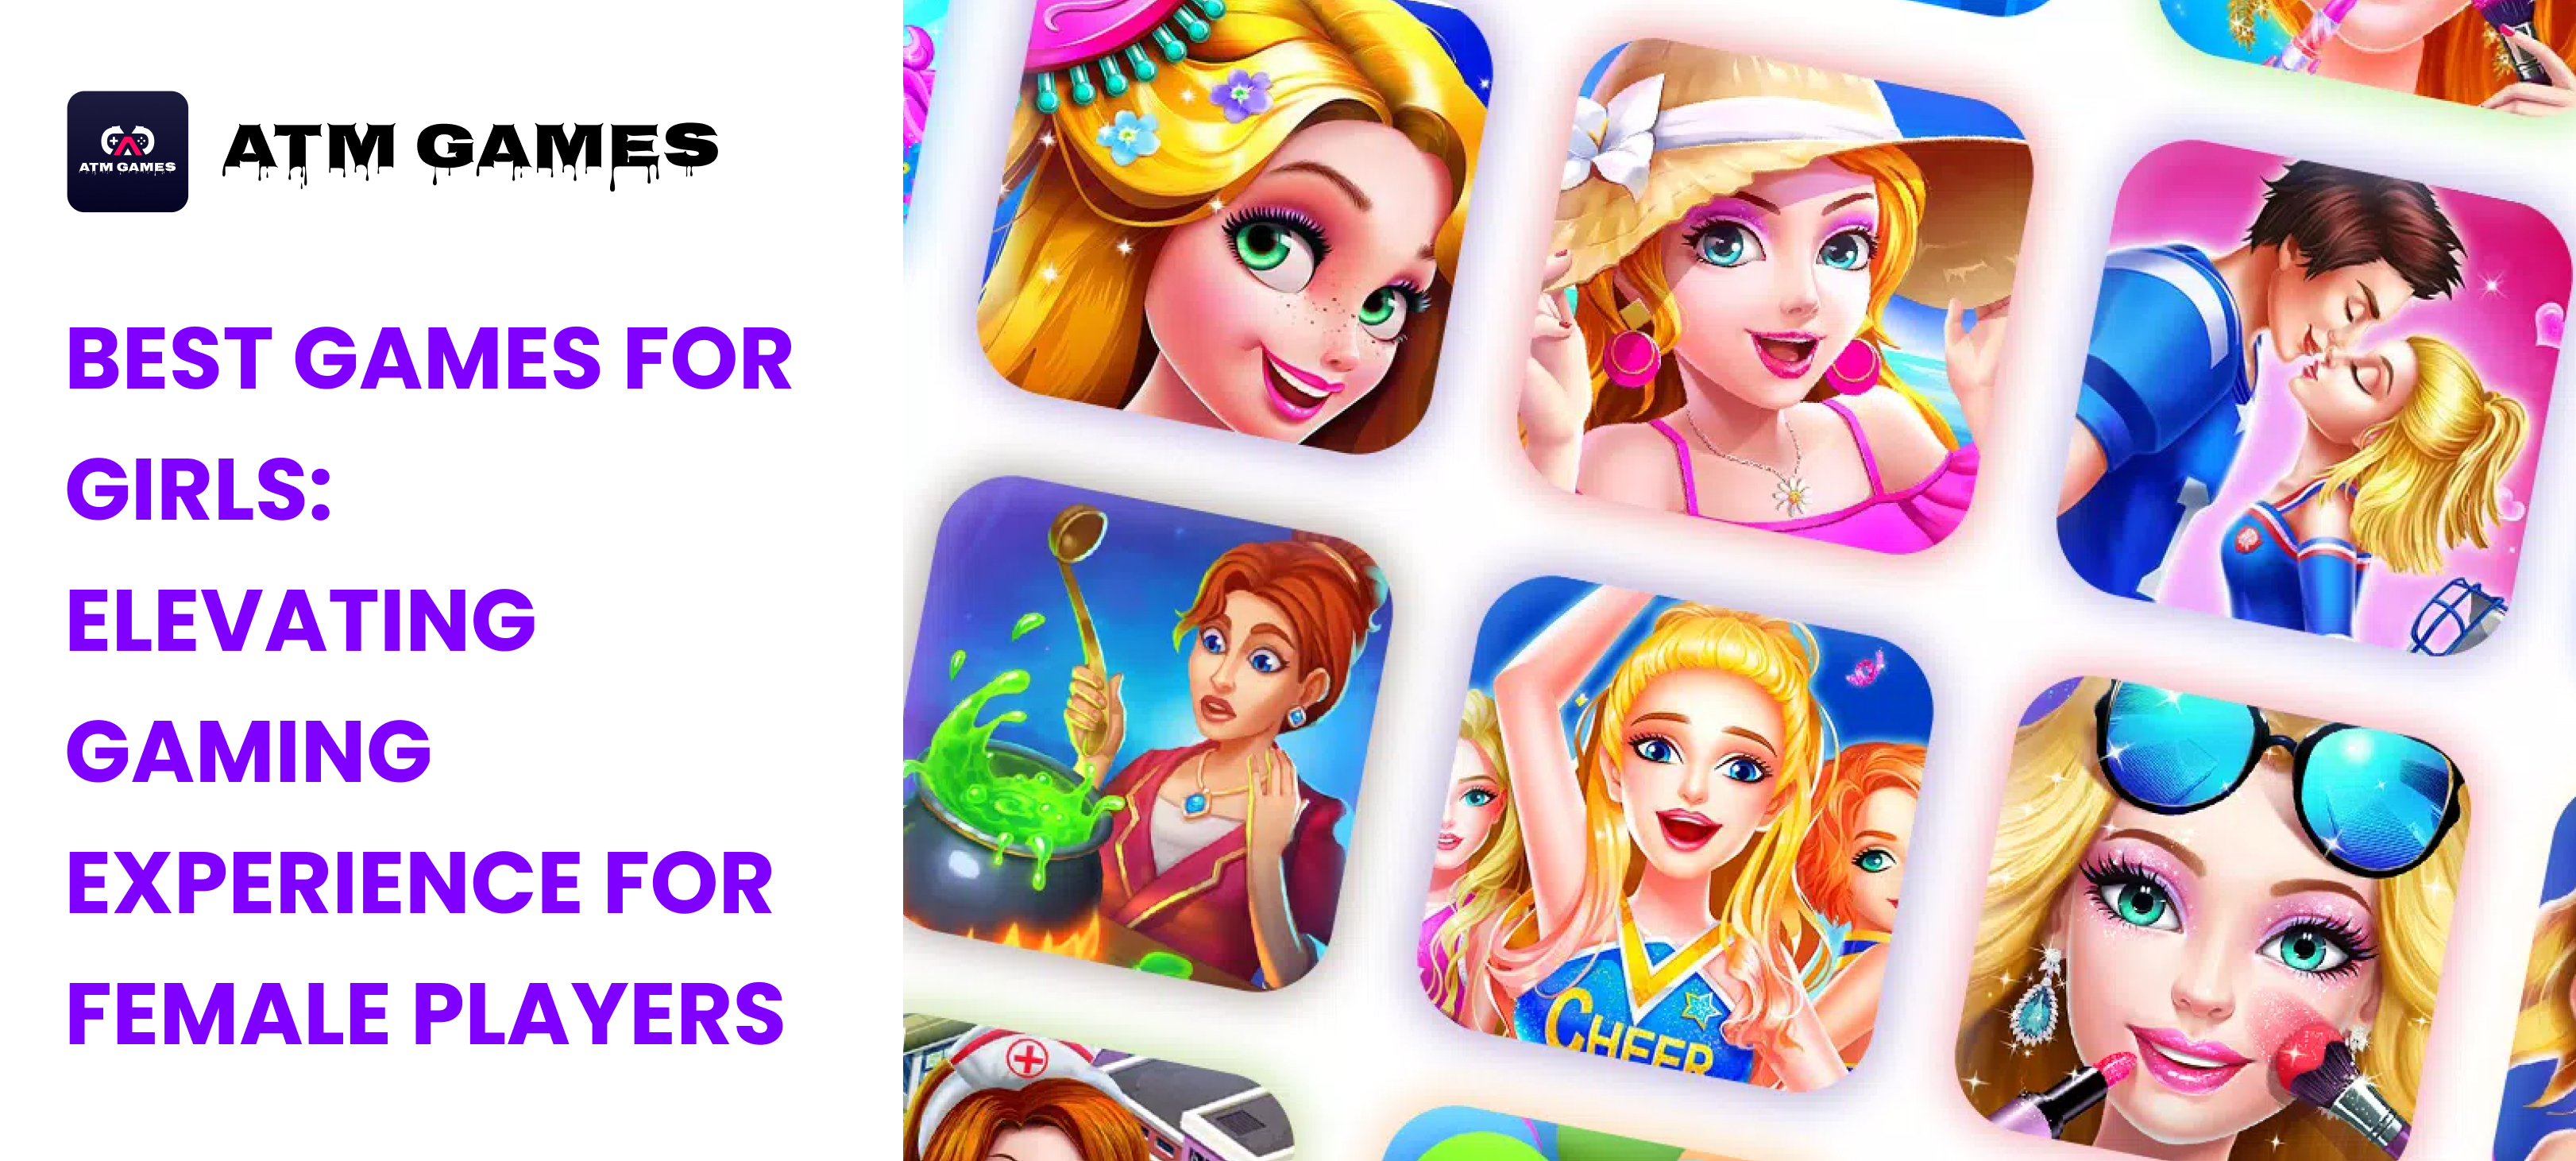 Best Games For Girls: Elevating Gaming Experience for Female Players | ATM HTML GAMES